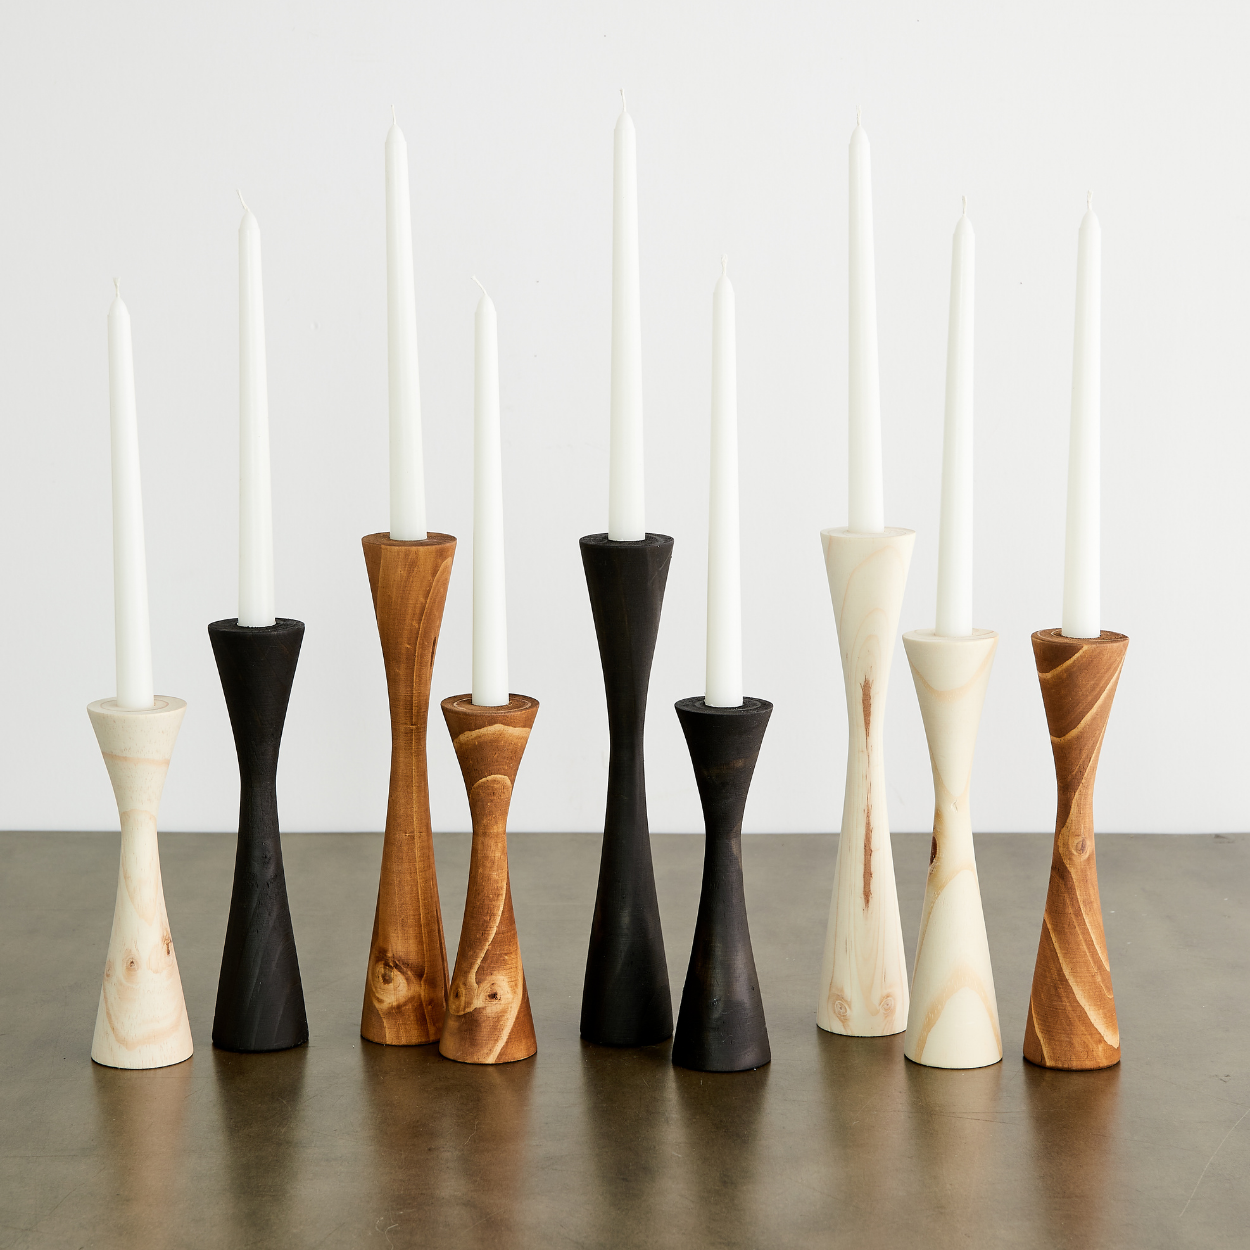  Wooden Geo Taper Candle Holders 9 Piece Set